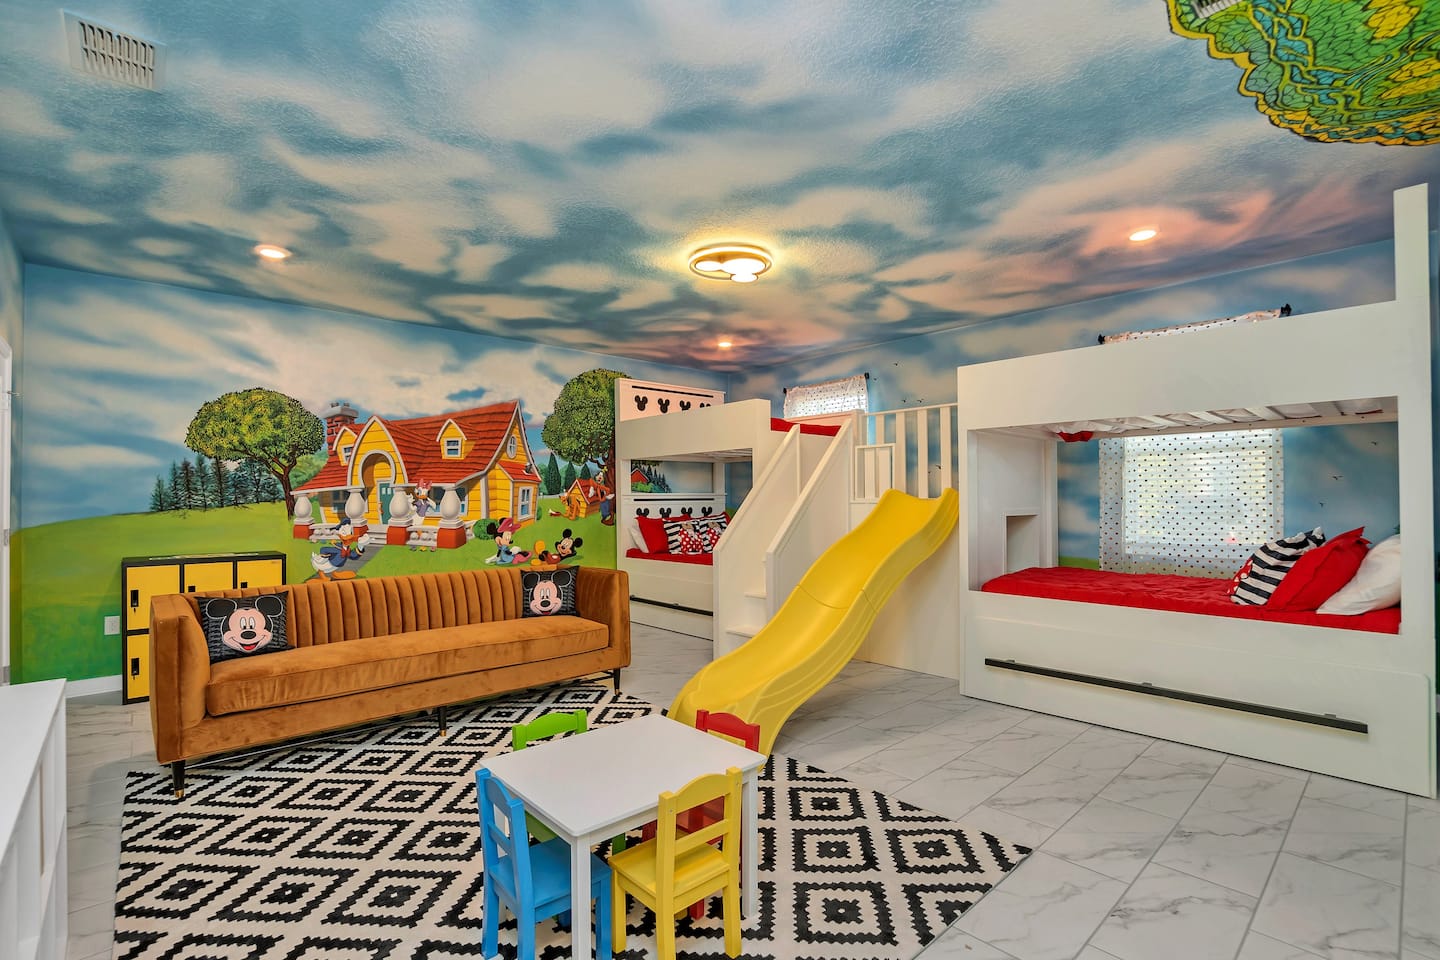 Mickey Mouse Clubhouse, one of the best Airbnbs in Orlando